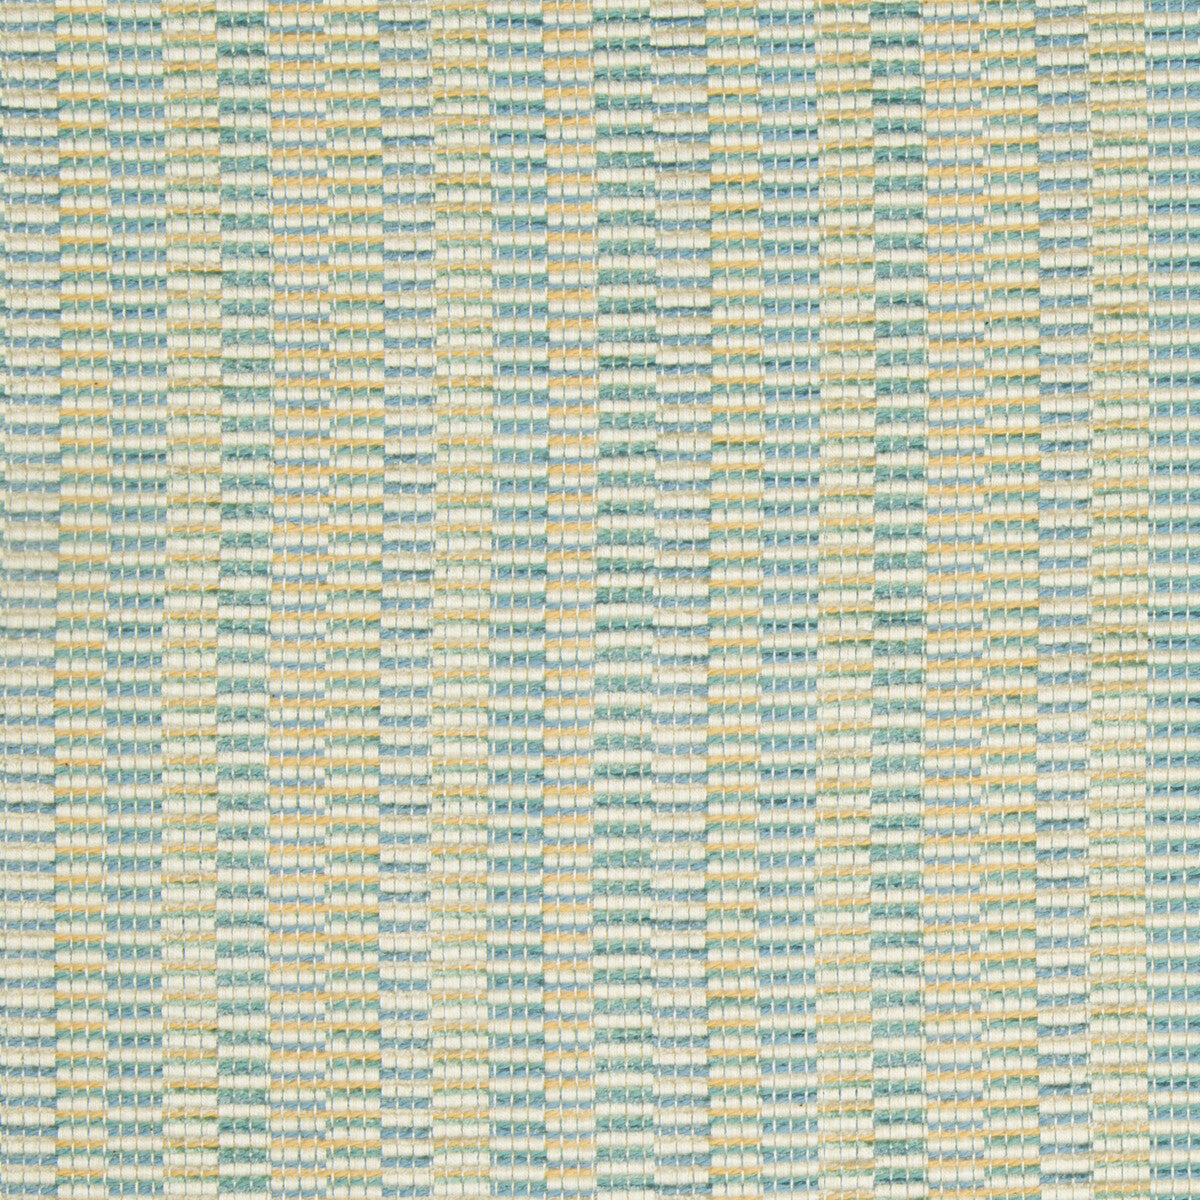 Kravet Design fabric in 34694-514 color - pattern 34694.514.0 - by Kravet Design in the Crypton Home collection